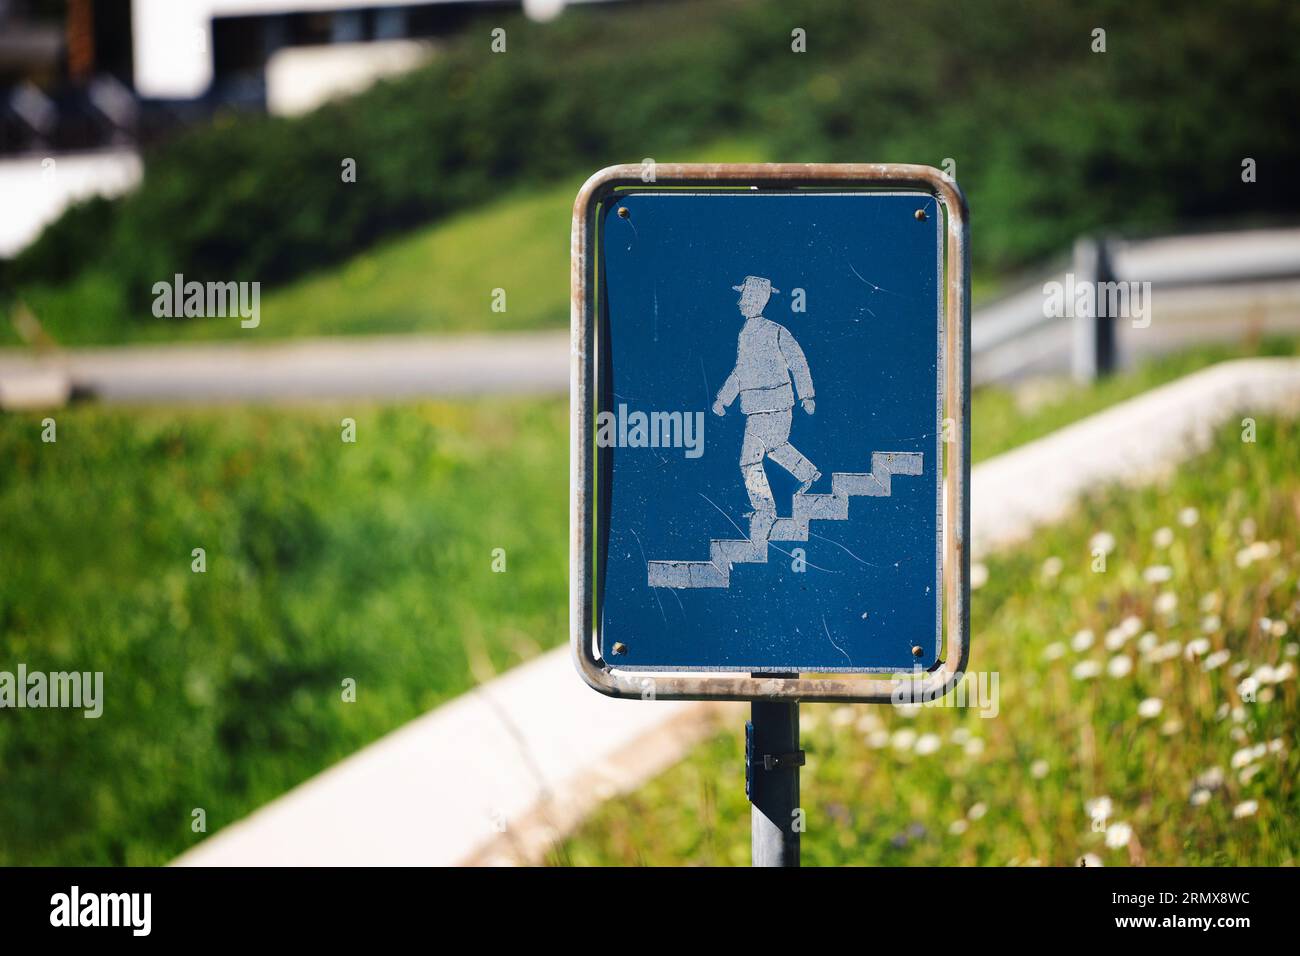 Traffic sign pedestrian descending, going down the stairs, crosswalk symbol Stock Photo